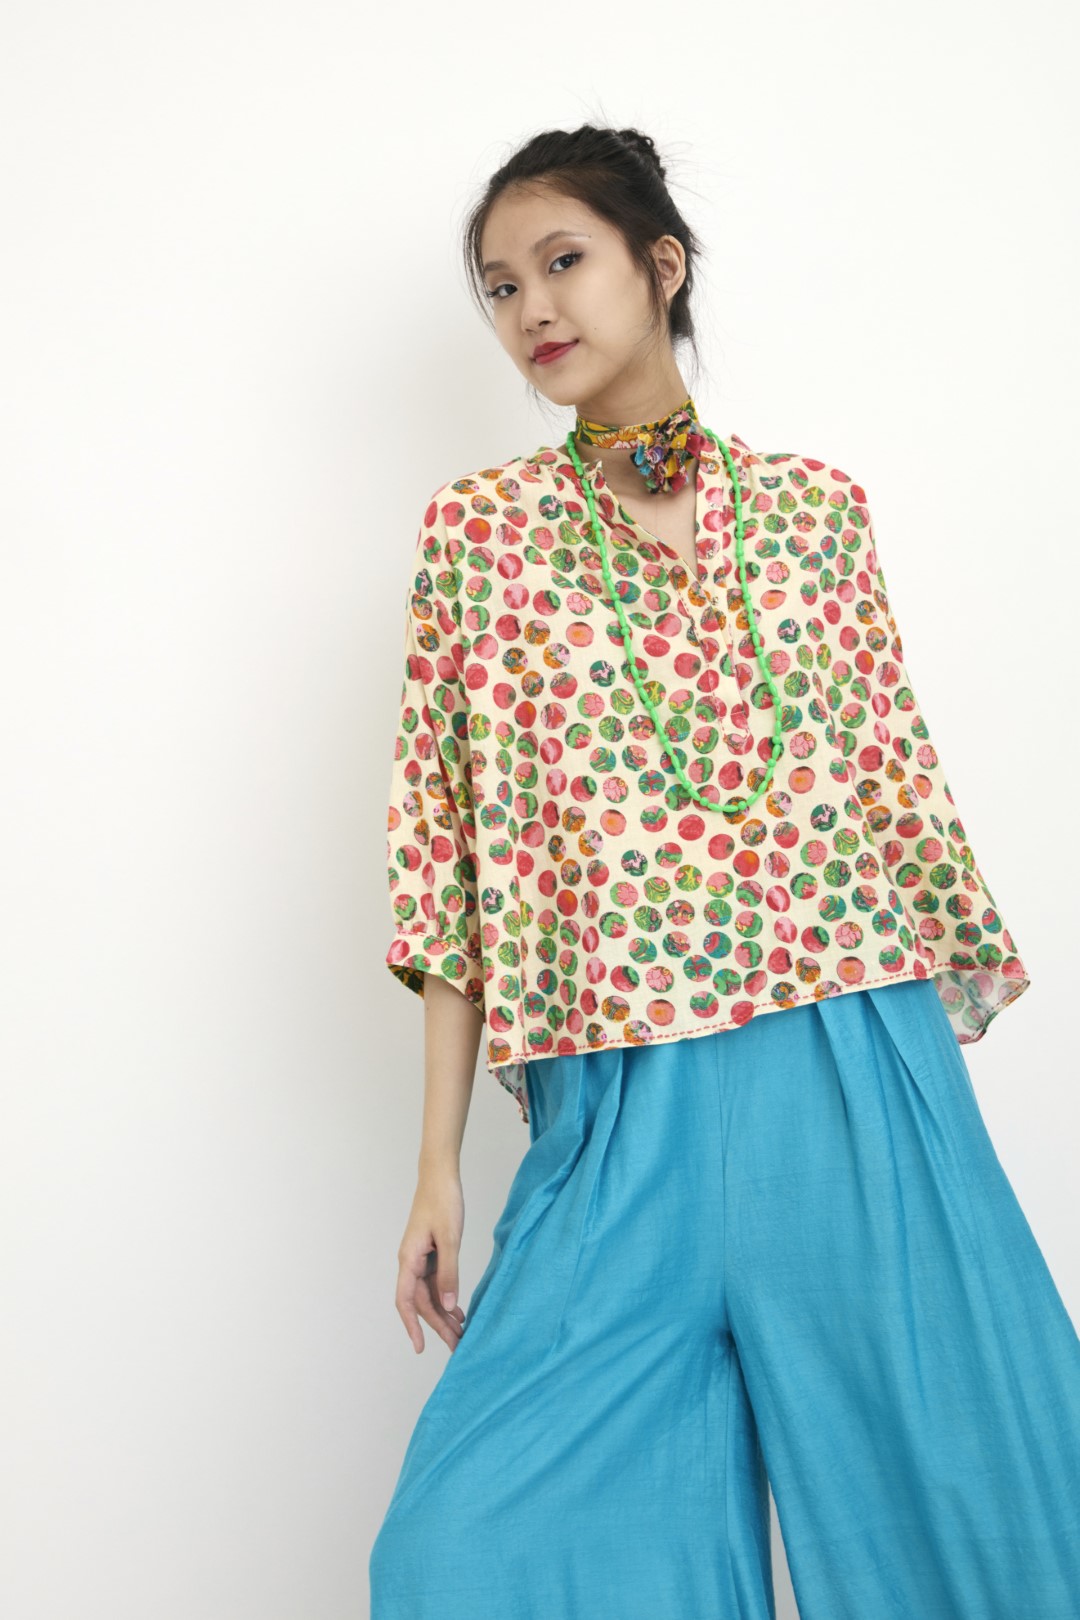 "Handwoven cream polka dot tunic with hand embroidery multi-colored brooch. 100% Handwoven silk 100% Azo Free Dry Clean Only"